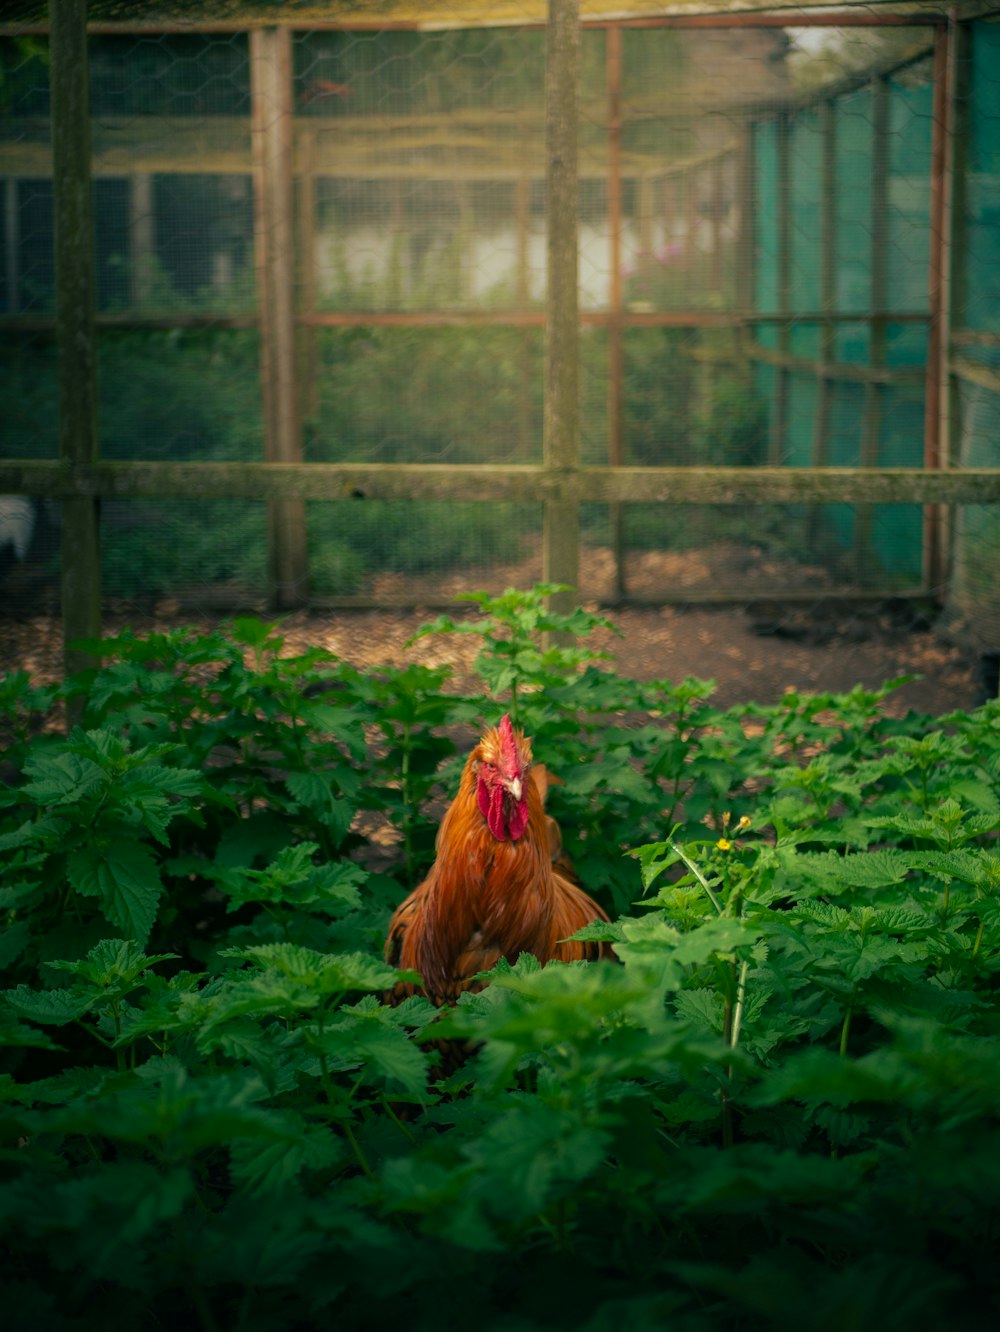 a chicken is standing in the middle of a garden